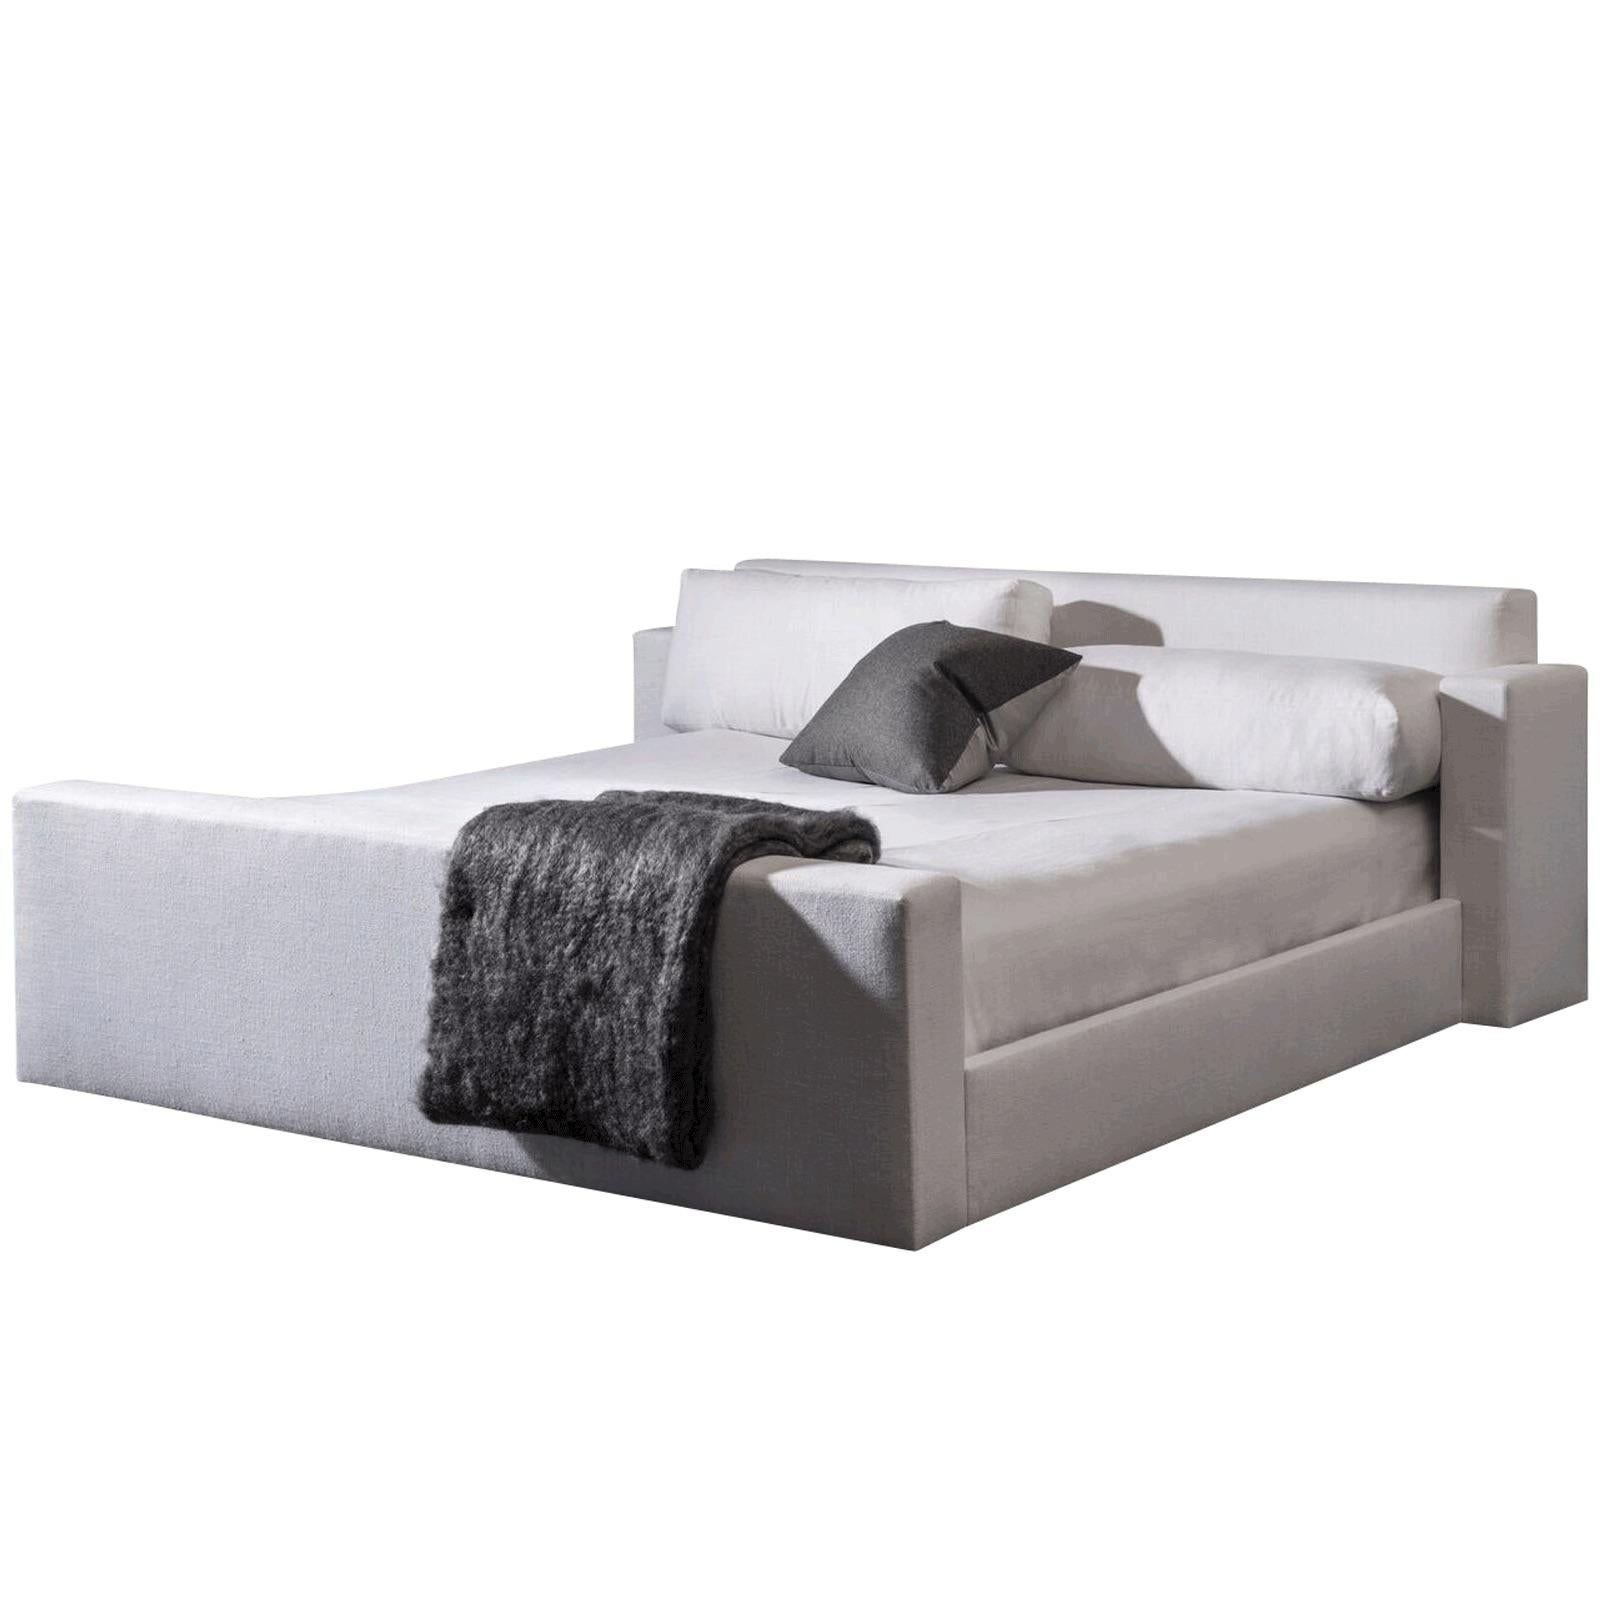 Modern Collins Bed For Sale